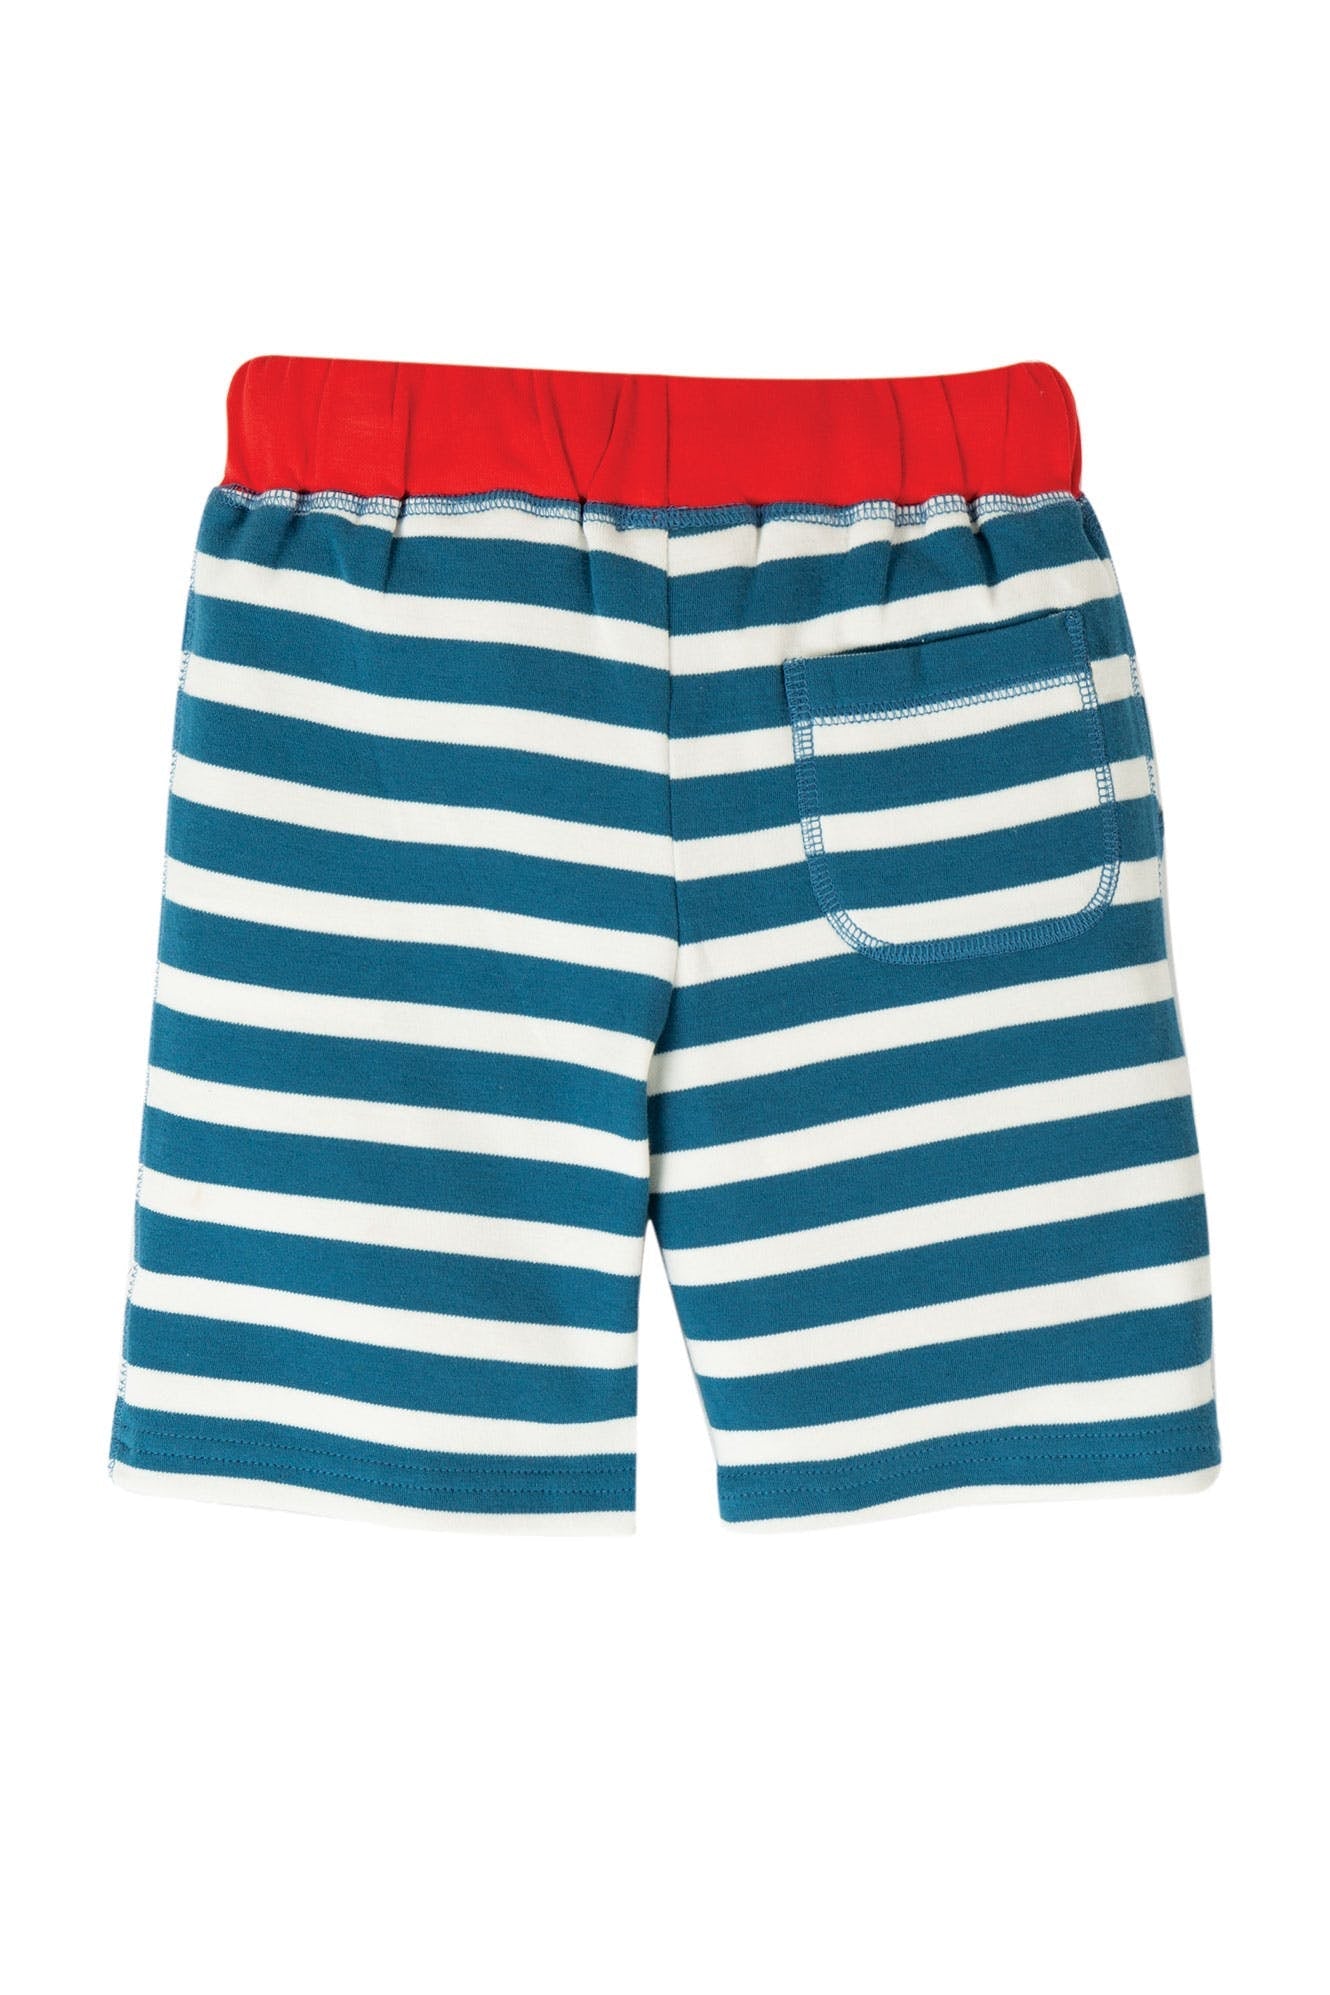 Frugi Stripy Short SS20-Kids-Ohh! By Gum - Shop Sustainable